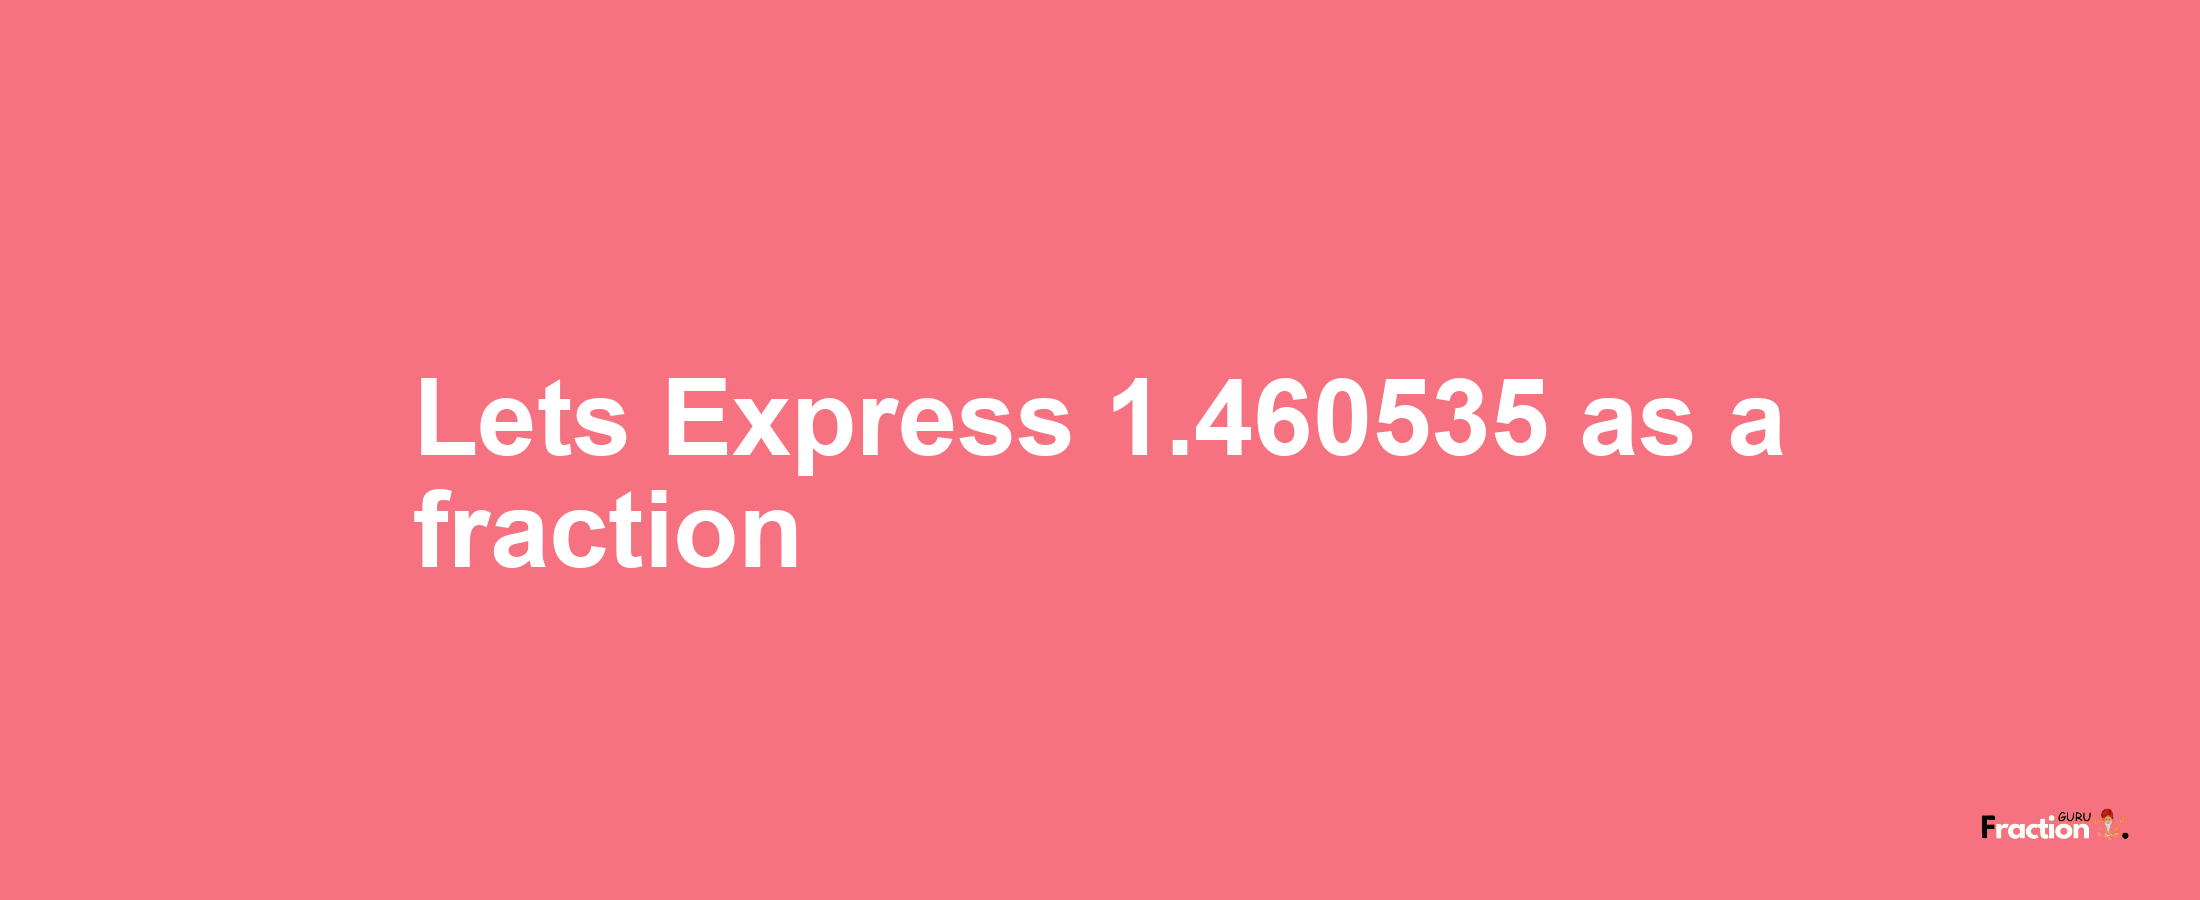 Lets Express 1.460535 as afraction